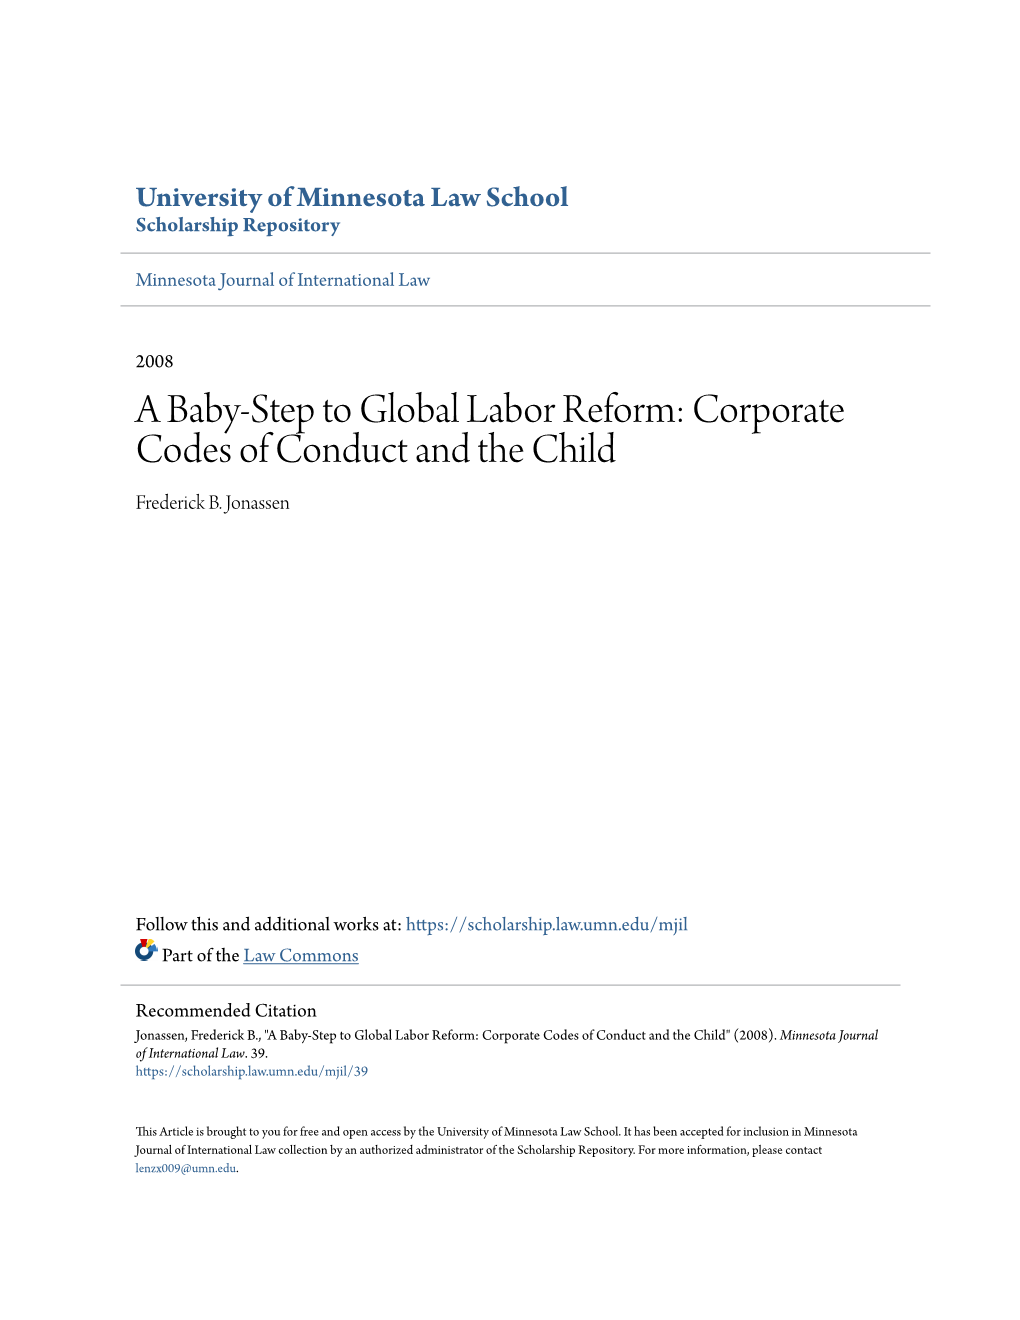 A Baby-Step to Global Labor Reform: Corporate Codes of Conduct and the Child Frederick B